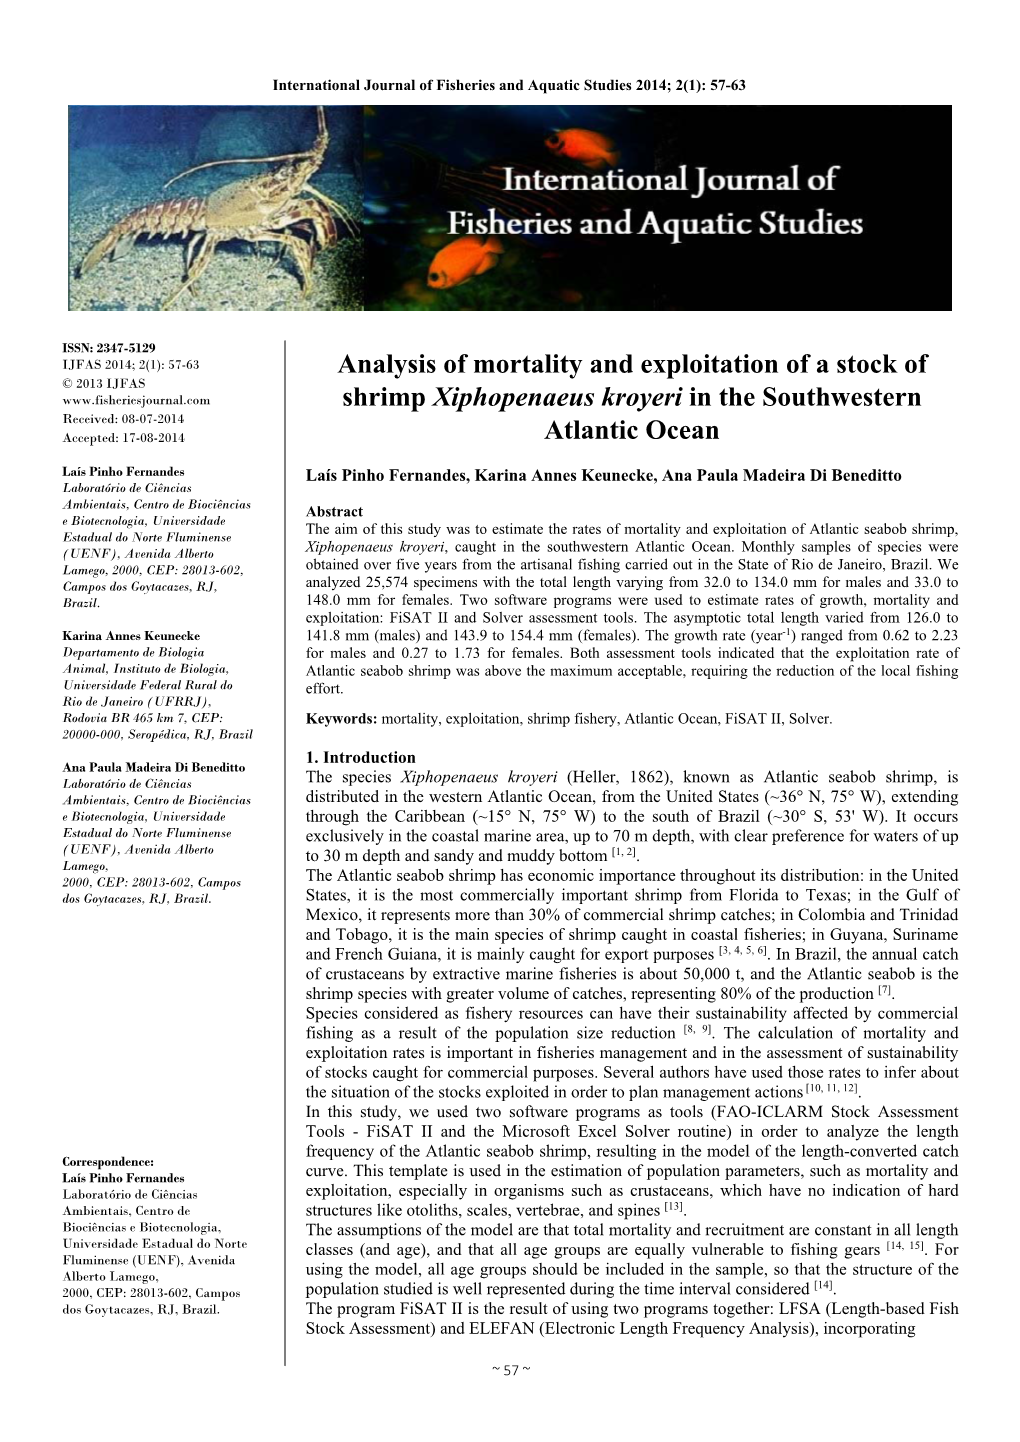 Analysis of Mortality and Exploitation of a Stock of Shrimp Xiphopenaeus